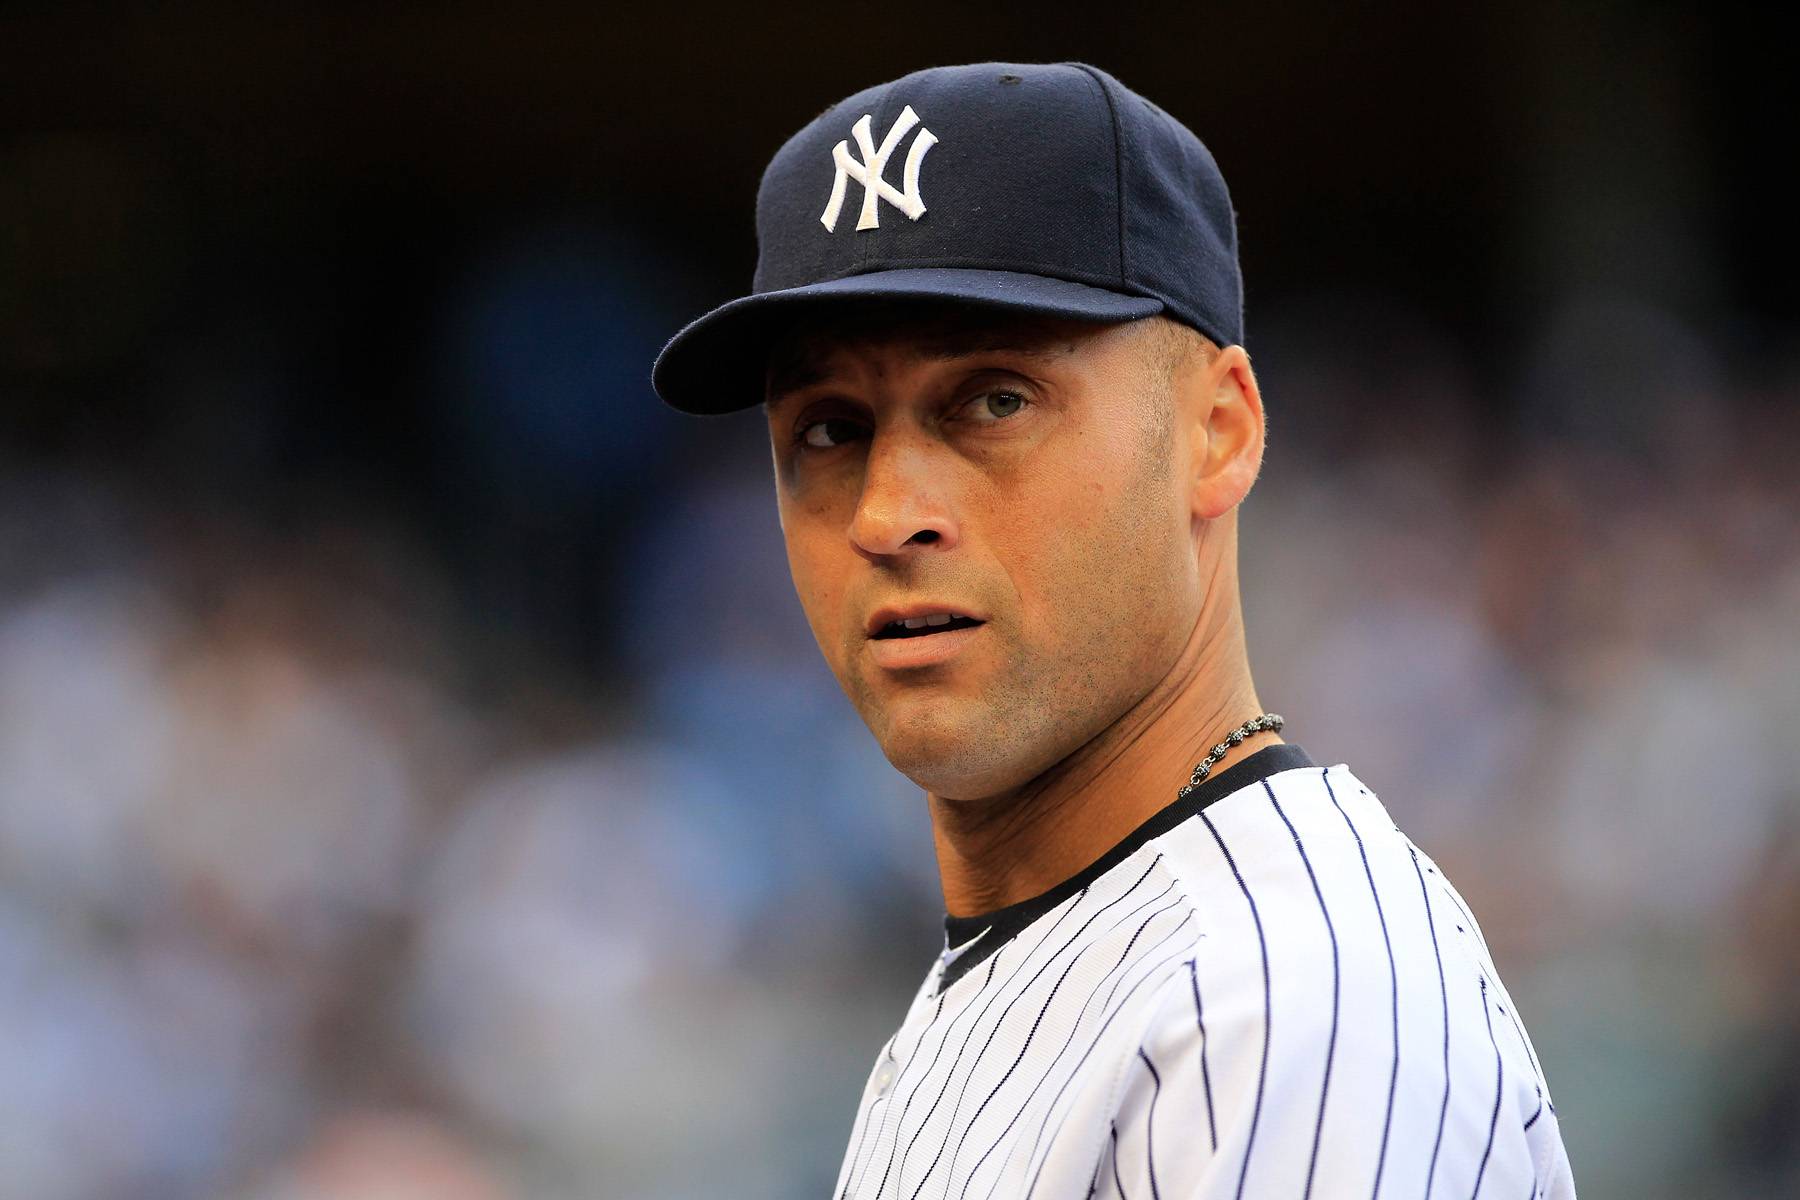 Derek Jeter Announces Retirement From Yankees - After 14 seasons, Derek Jeter will hang up his bat and glove. In a&nbsp;Facebook post, he&nbsp;said he will retire from professional baseball after the 2014 season. Last year, he missed much of the season&nbsp;due to an ankle injury.&nbsp;His final game at Yankee Stadium will be on Sept. 25.(Photo: Chris Trotman/Getty Images)